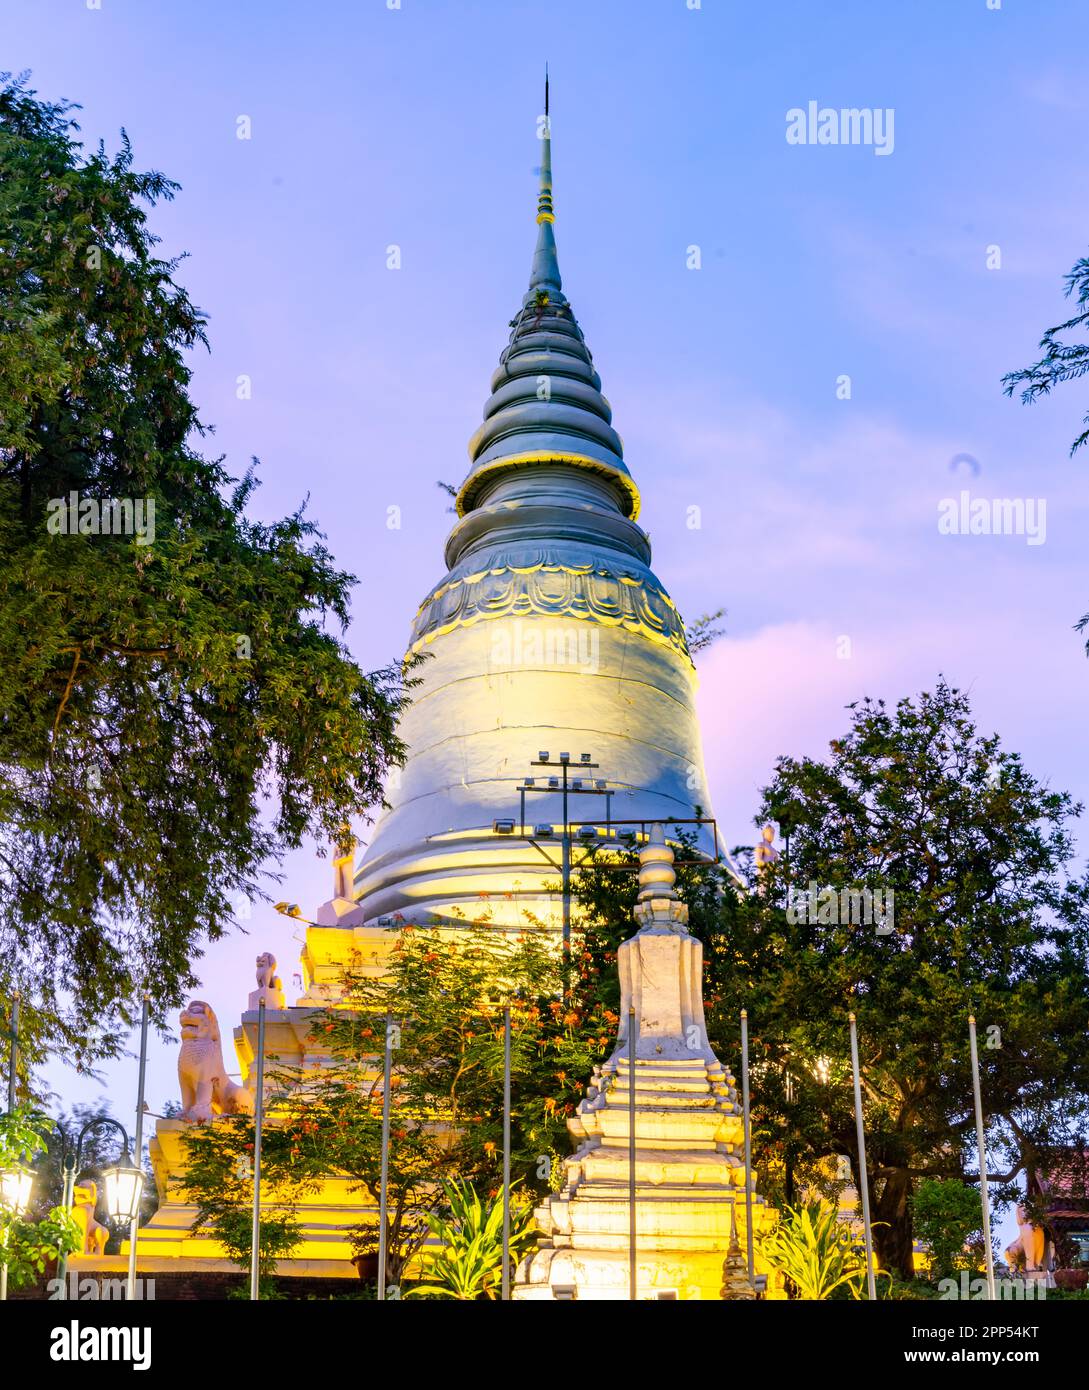 In Wat Penh gardens,a gift from China,covered in green grass,a large working clock,beneath the hilltop pagoda of Wat Phnom,a prominent city landmark,n Stock Photo